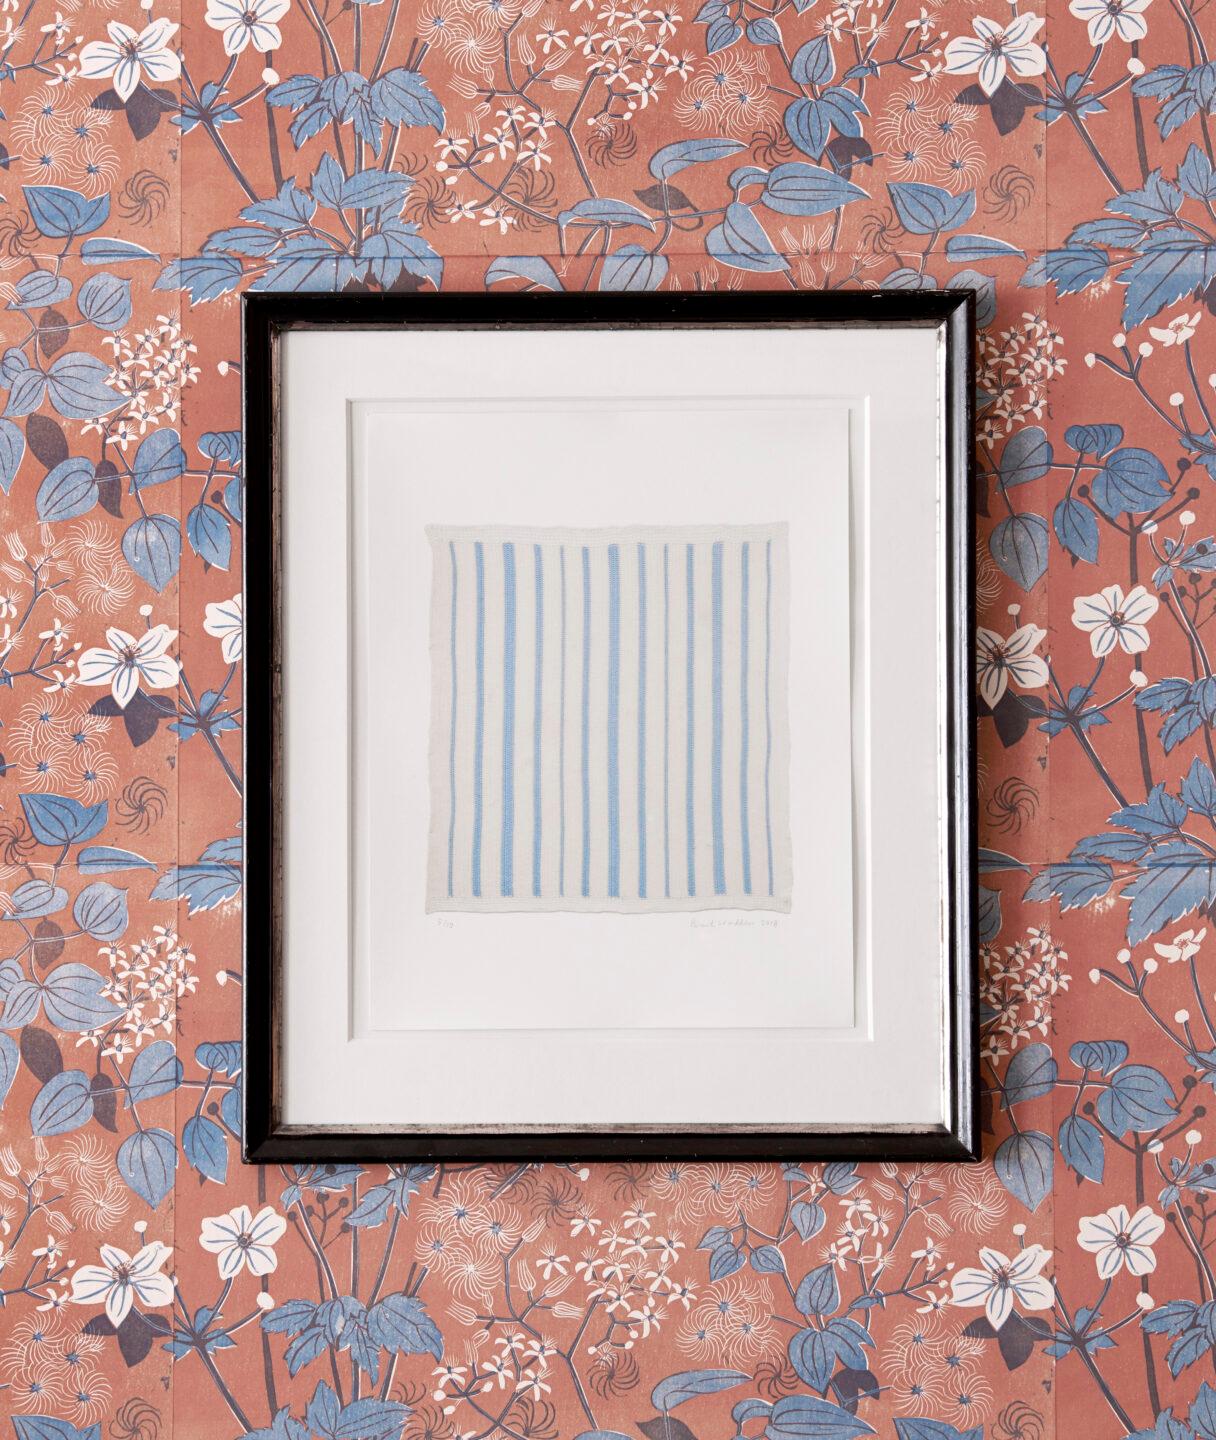 Beautiful Brent Wadden 'Unititled' (Baby Blanket) artwork, Canada 2018. Archival pigment print in colors on cotton rag paper. The piece is signed, dated and numbered from an edition of 10., No. 5. Paired with simple vintage frame in silver and